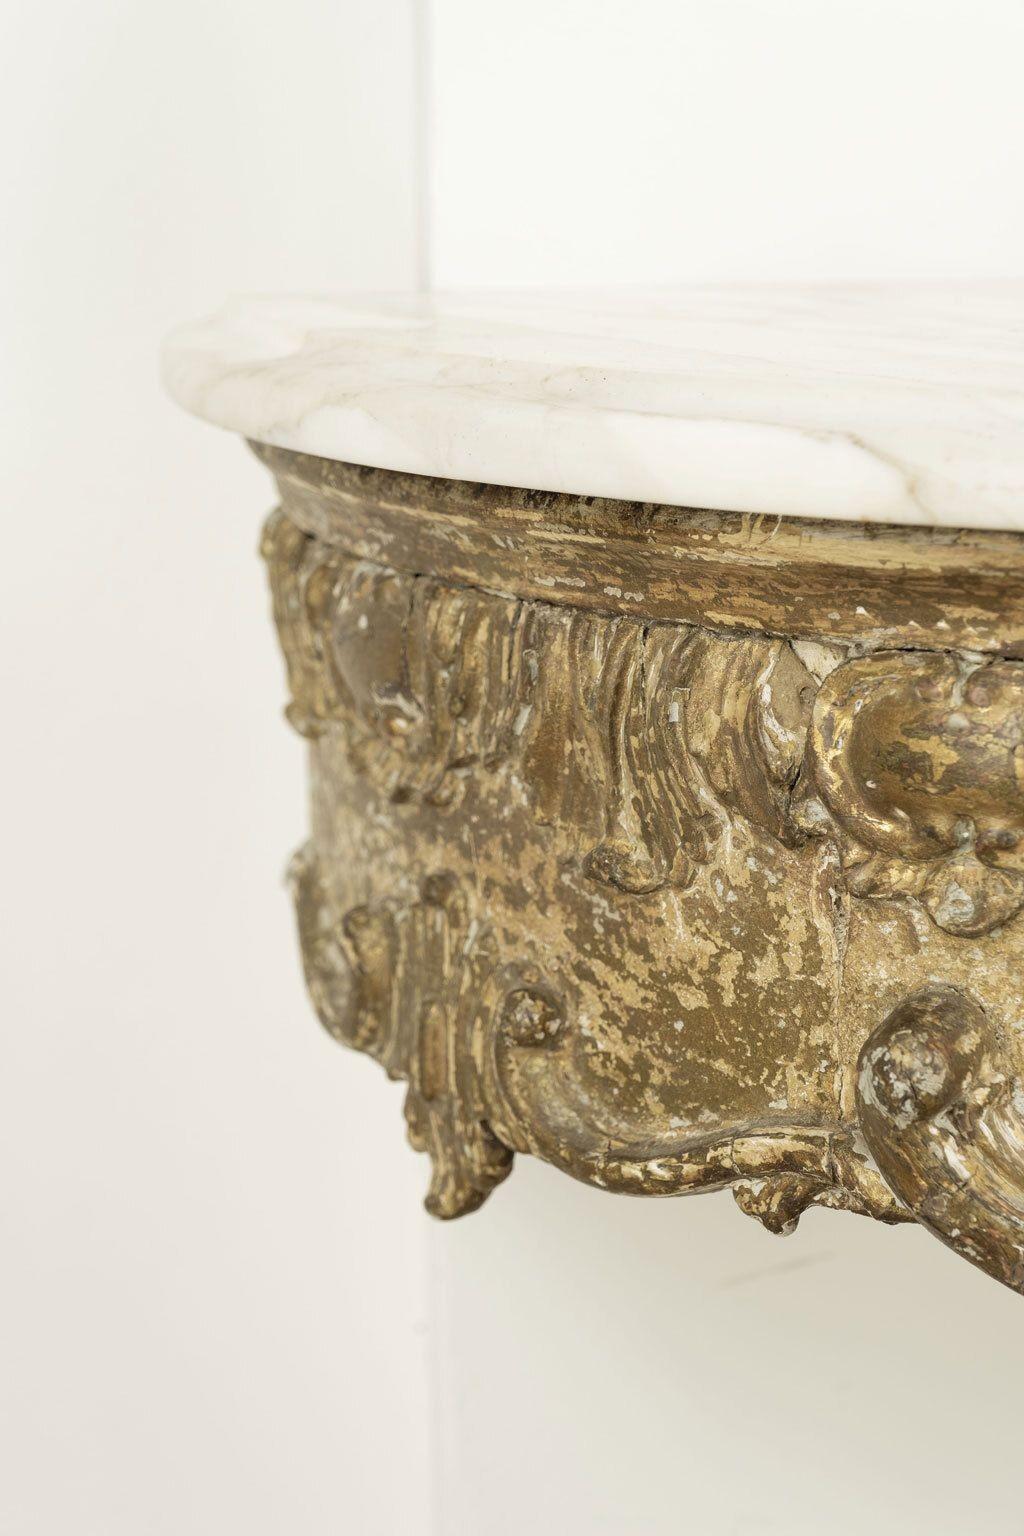 18th century French giltwood console circa 1740-1770. Extremely well-executed wall-mounted console hand-carved in giltwood with demilune Carrara marble top.

Note: Regional differences in humidity and climate during shipping may cause antique and